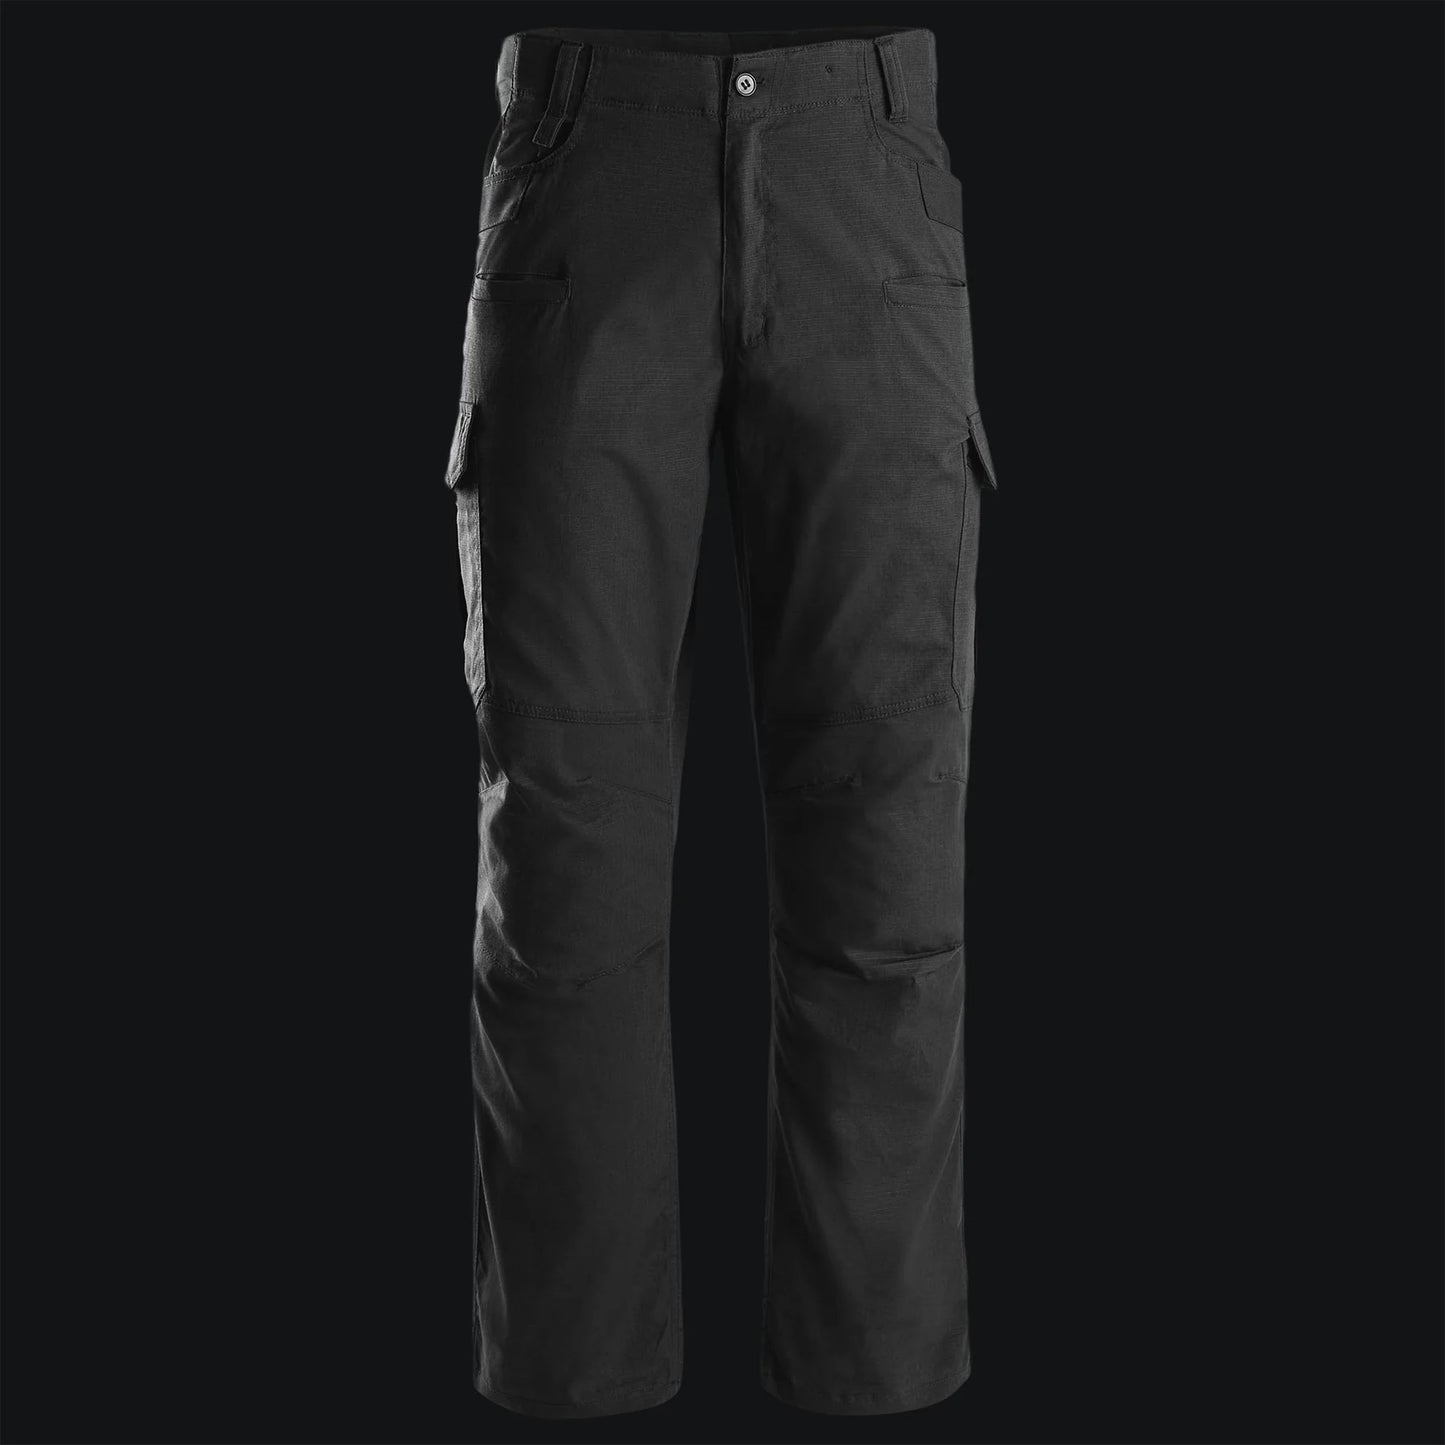 Stoirm Tactical Trousers - Black